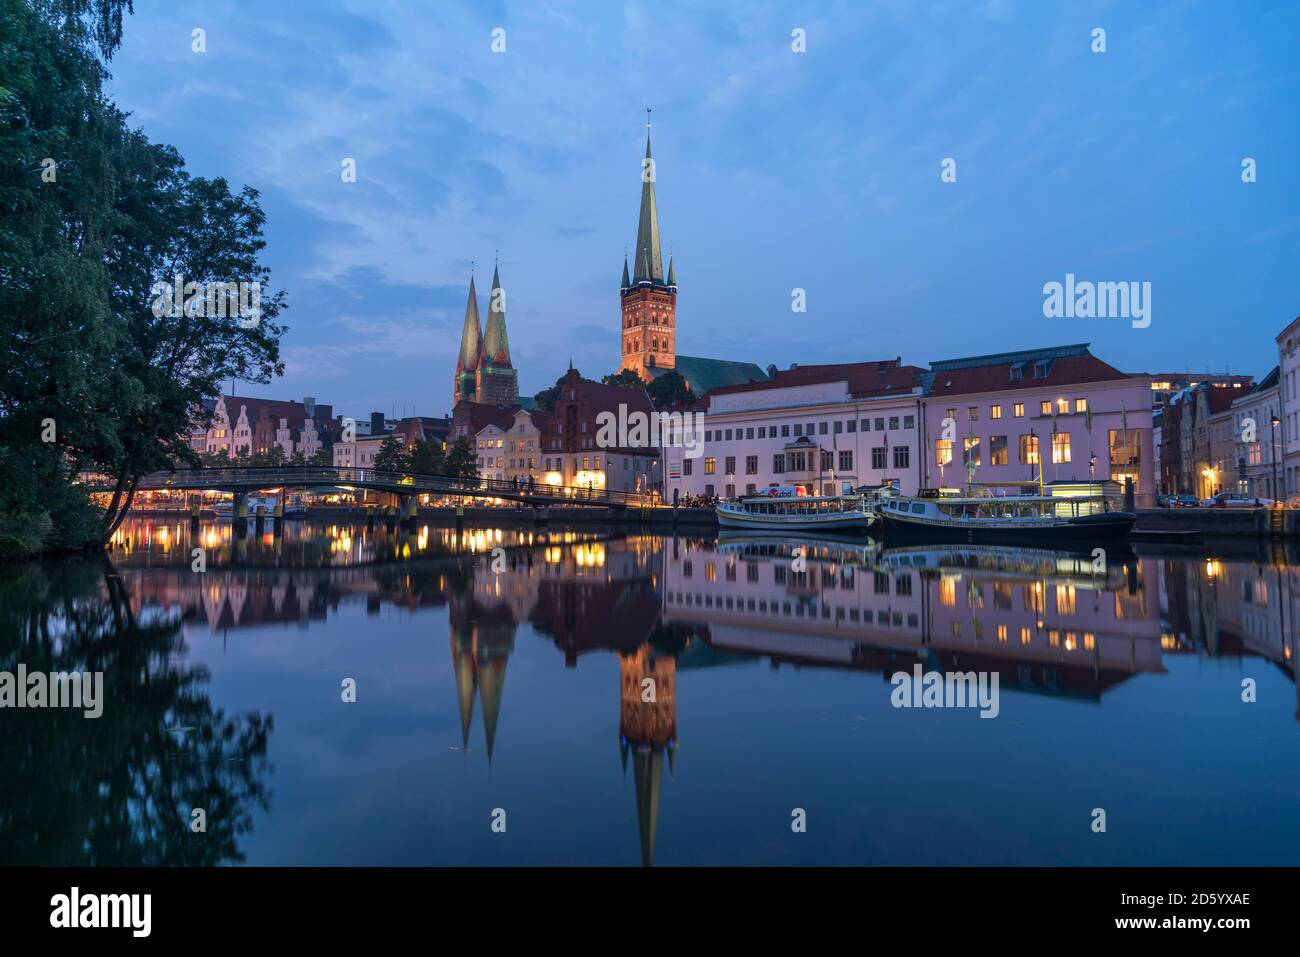 Germany, Luebeck, old town and river Trave at dusk Stock Photo